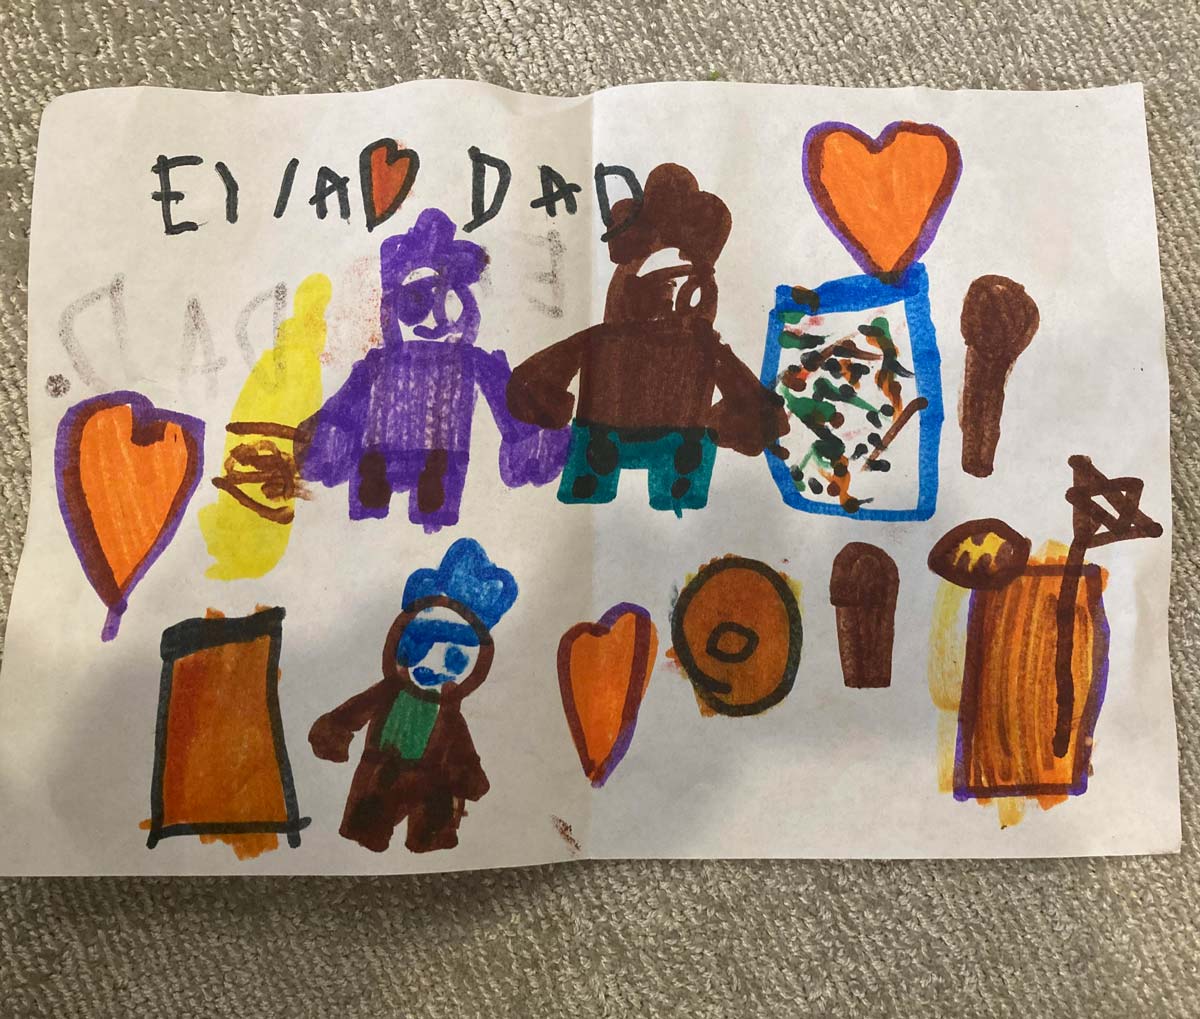 Card from 6-year-old daughter "Happy birthday daddy, it's everything you love, pirate Legos, hot sauce, mayonnaise and drinks!"